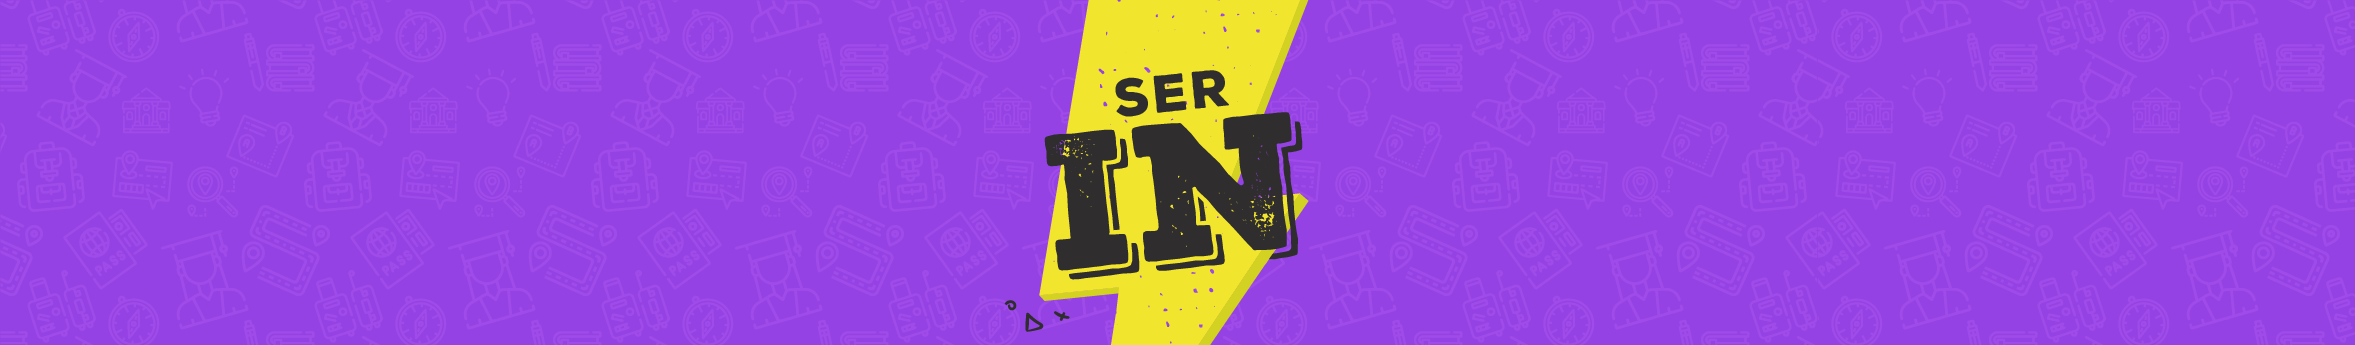 banners-ser-in-micrositio